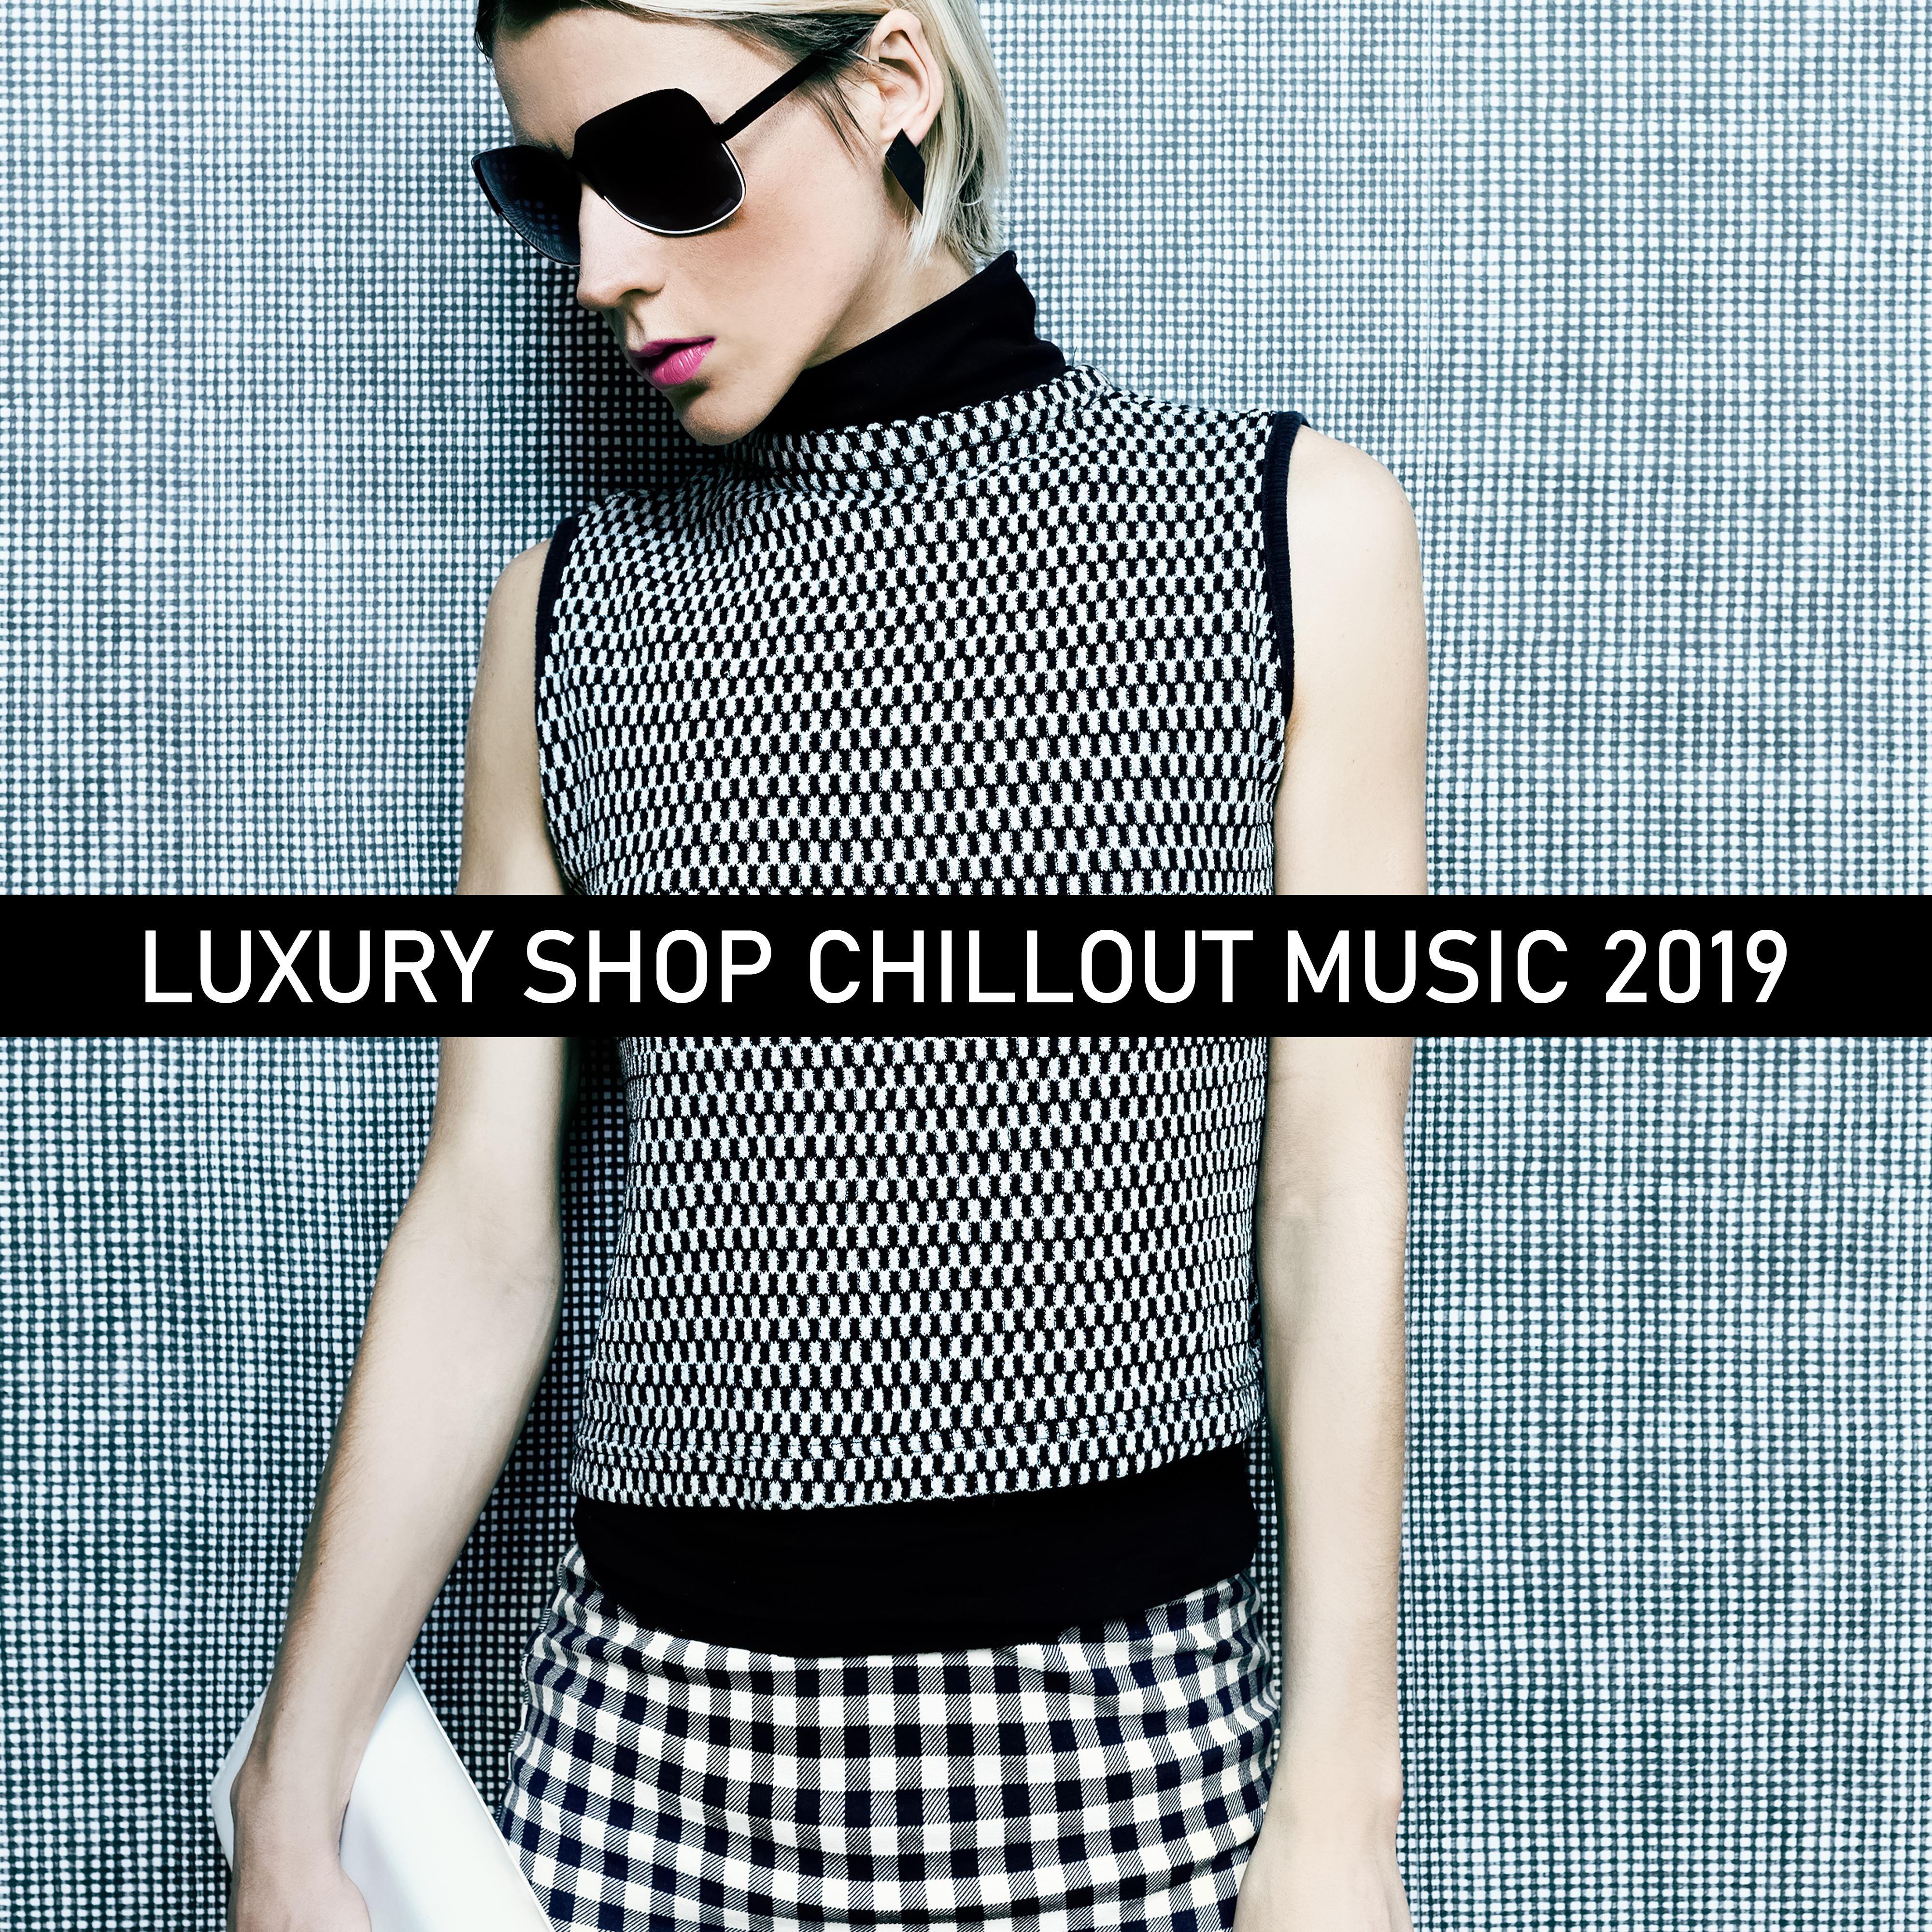 Luxury Shop Chillout Music 2019: Compilation of Best Chill Out Shopping Music, Background for Luxury Fashion Boutique